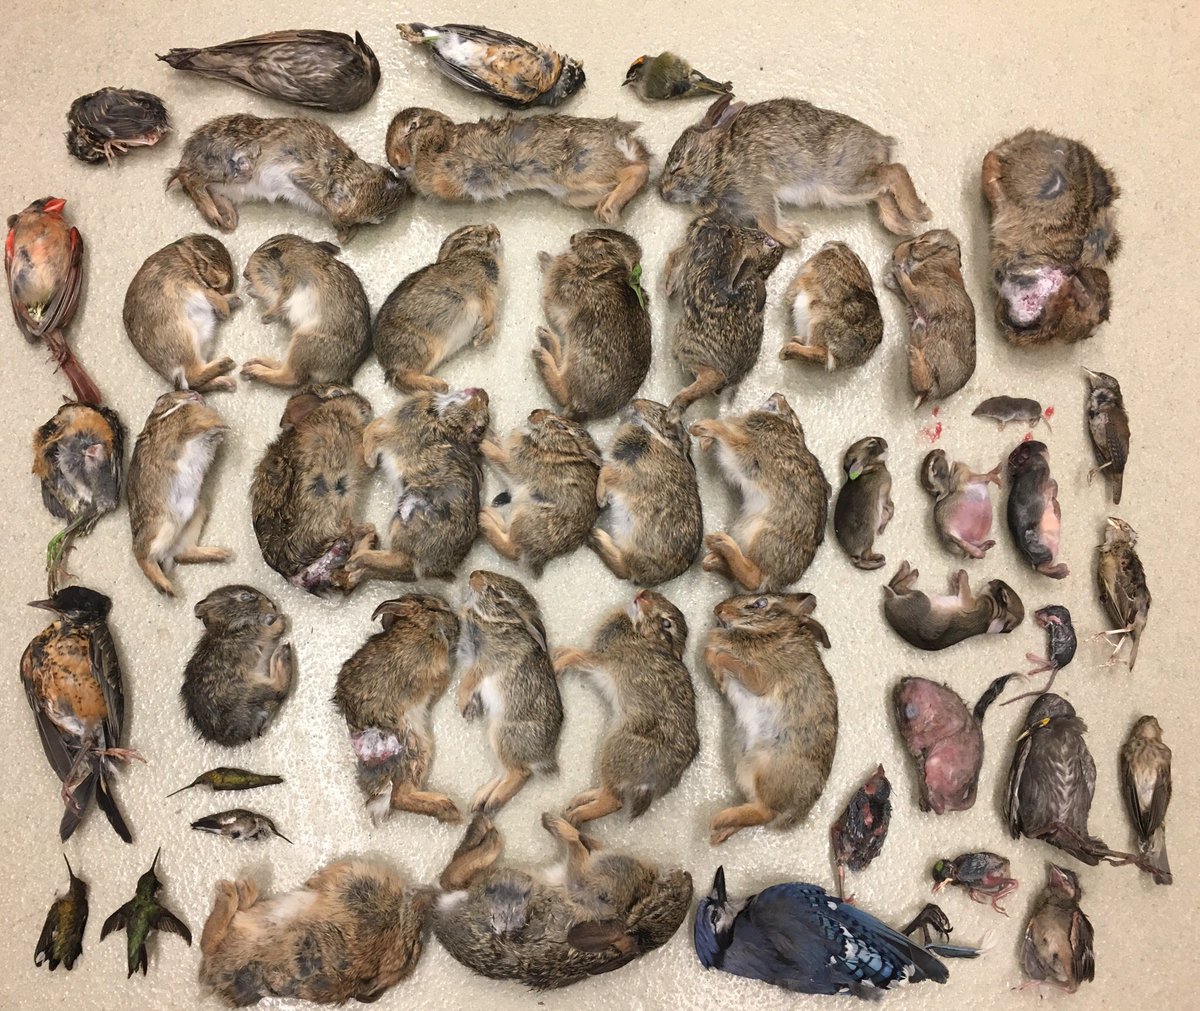 CW: dead animalsThis June, we decided to do our own month-long version of  @WildCare ‘s “Caught by Cats" project to show the damage that cats cause to wildlife when humans allow them to roam. Every animal in this photograph died or was euthanized due to a domestic cat in June.